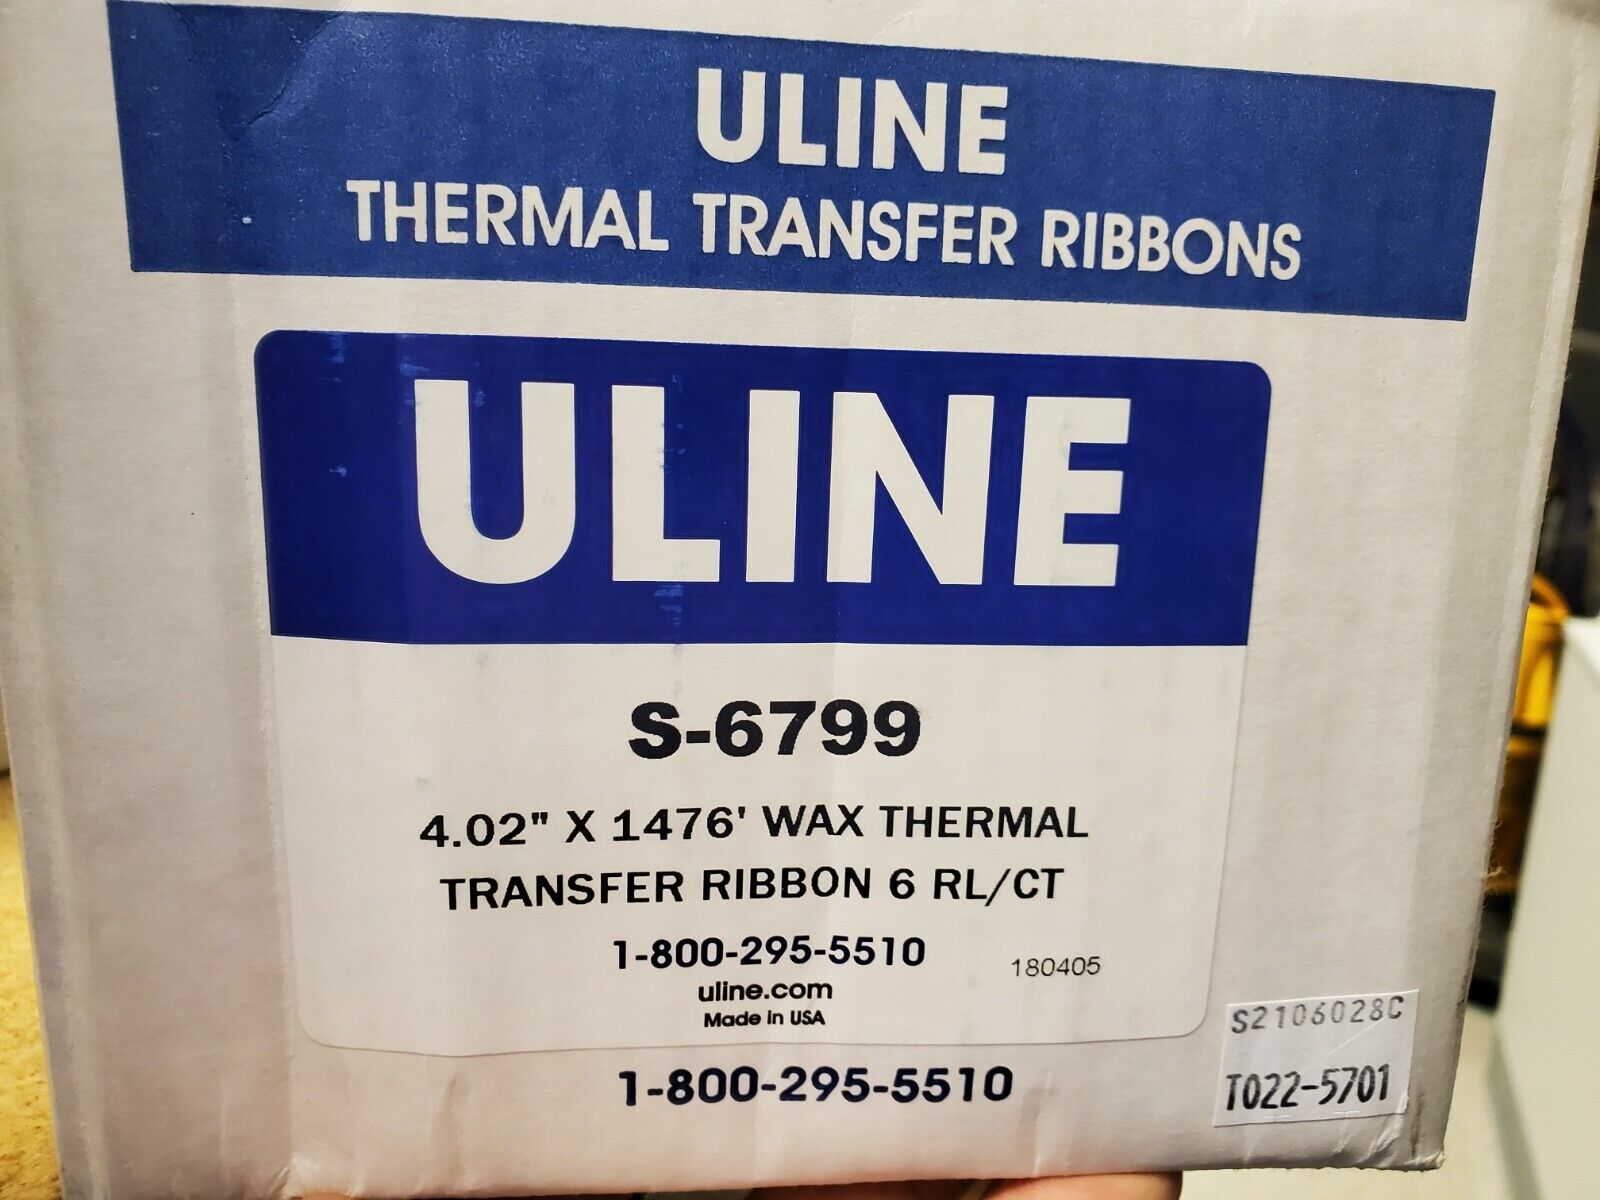 Uline S-6799 Industrial Thermal Transfer Ribbon - Box Of 6